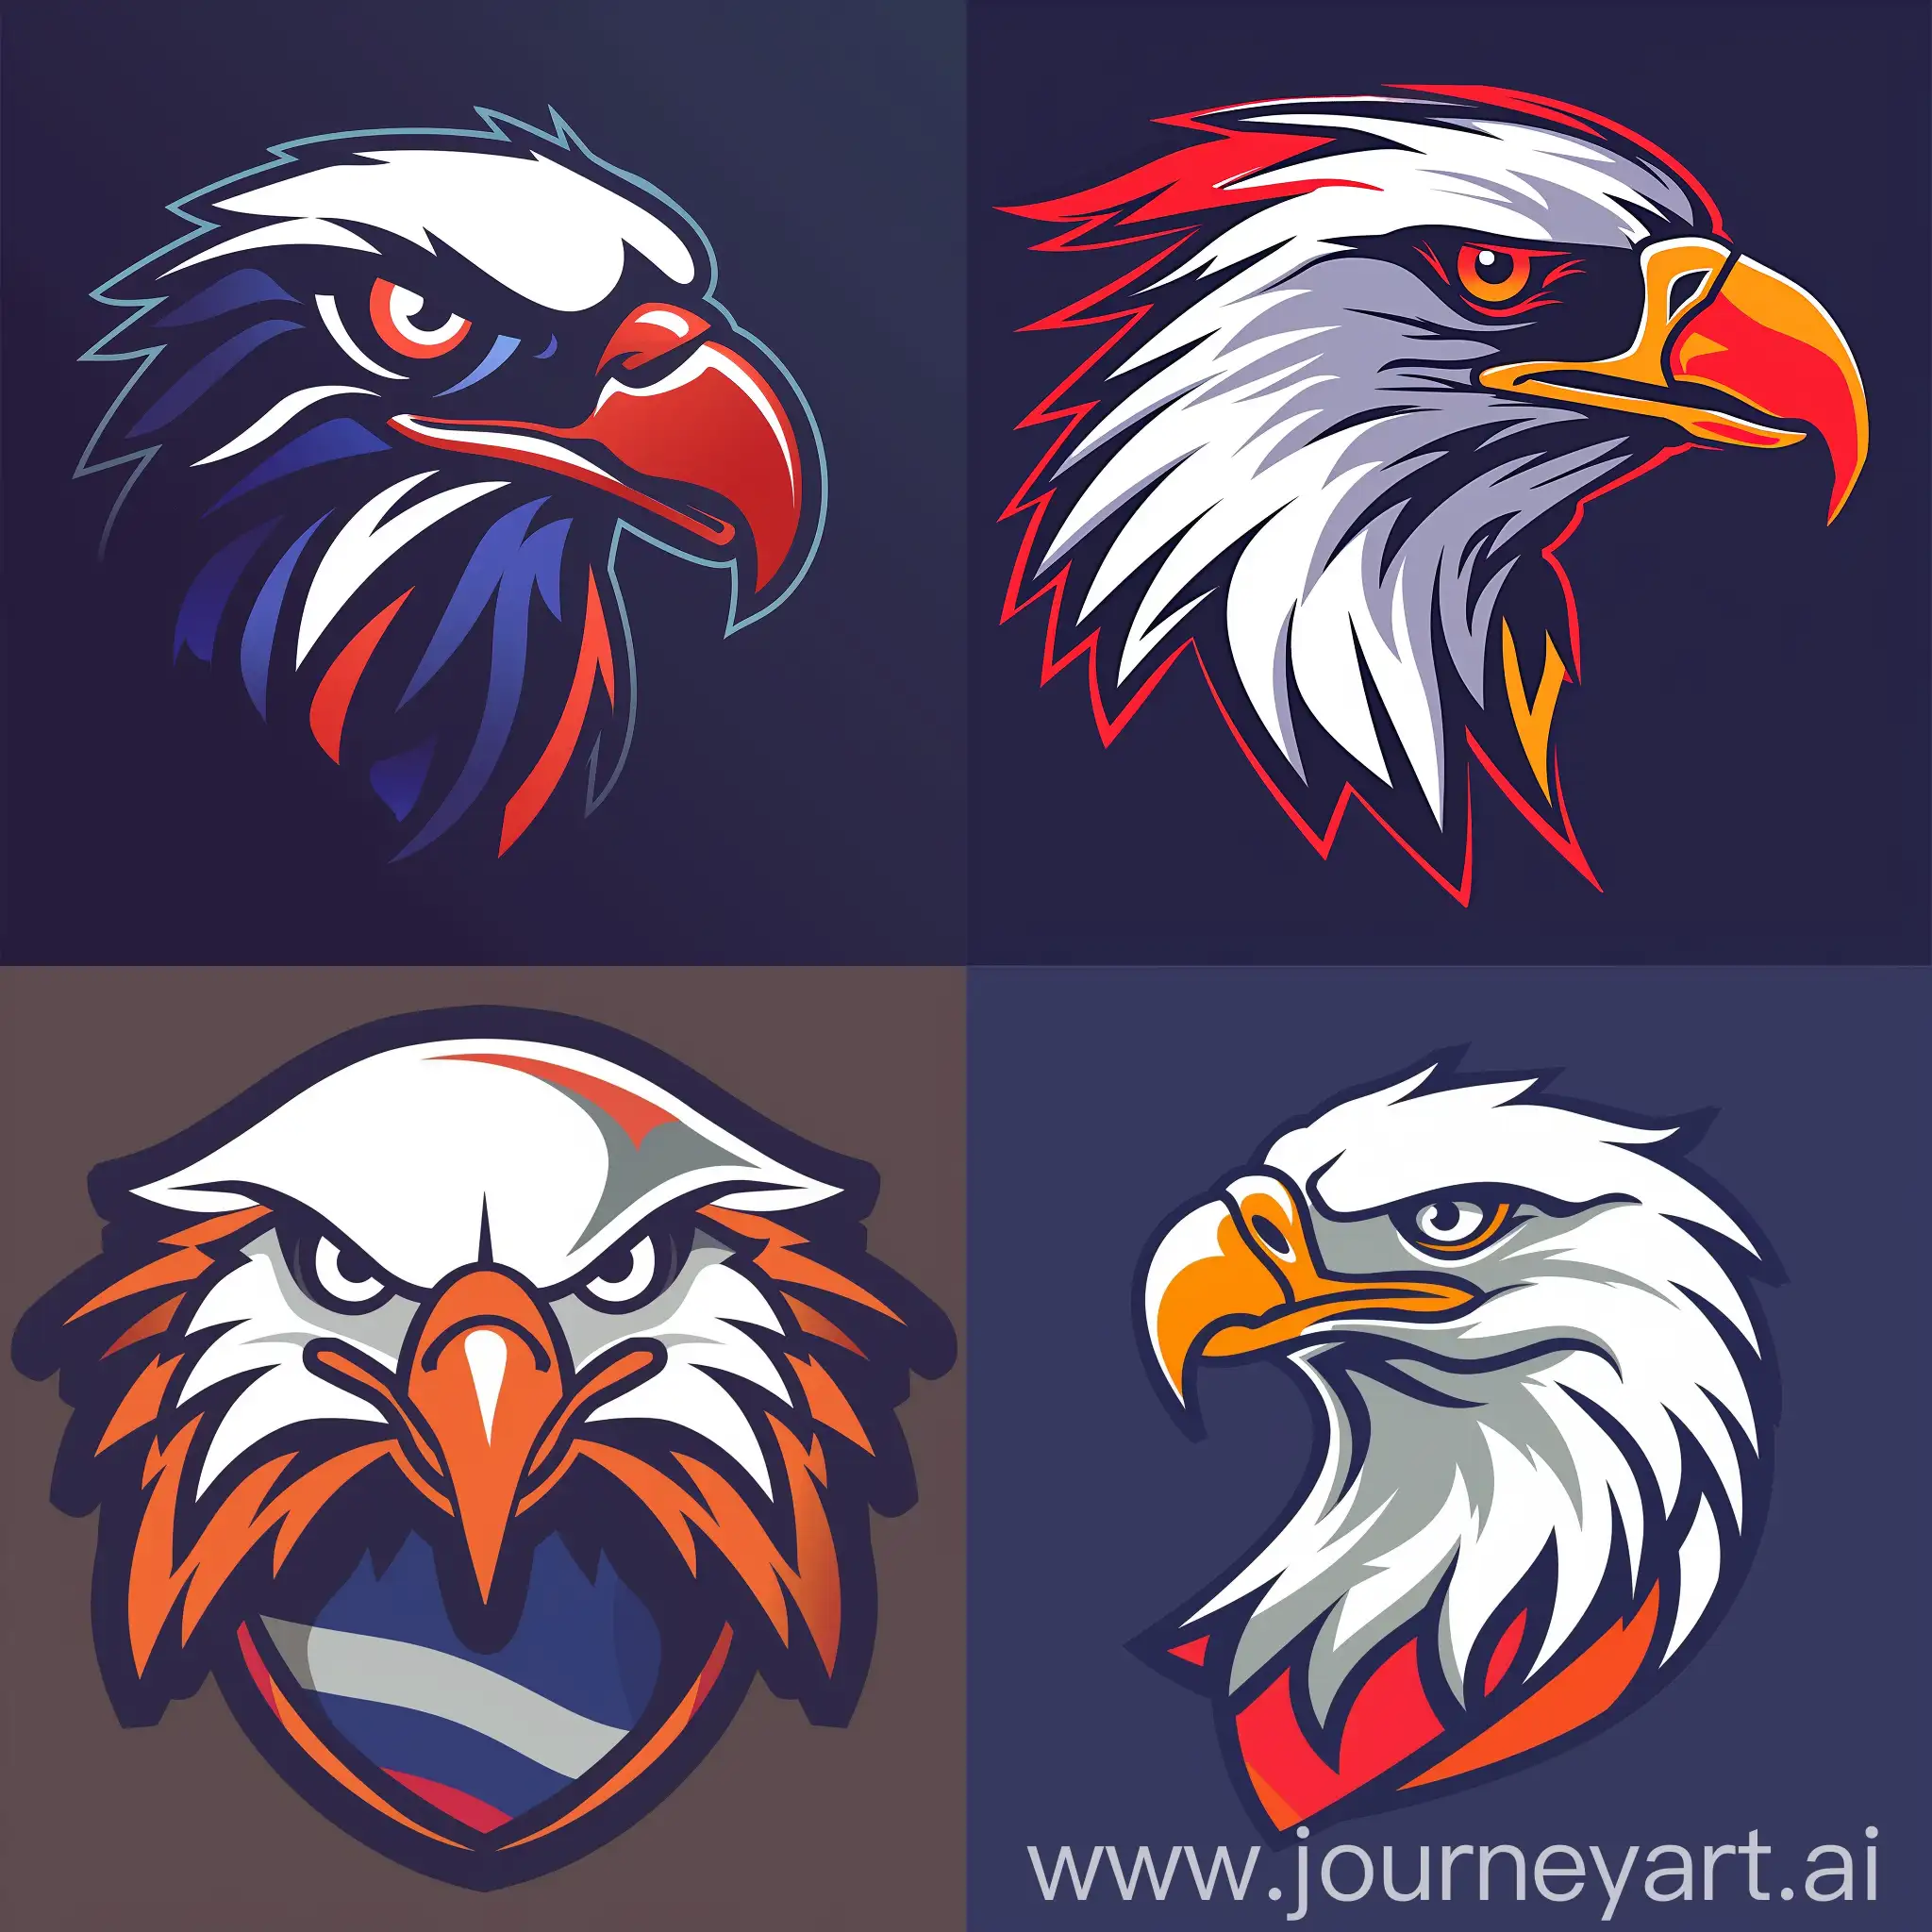 Cyber sports team logo, team mascot is an eagle, the color of the logo is taken from the flag of Armenia, the background is plain